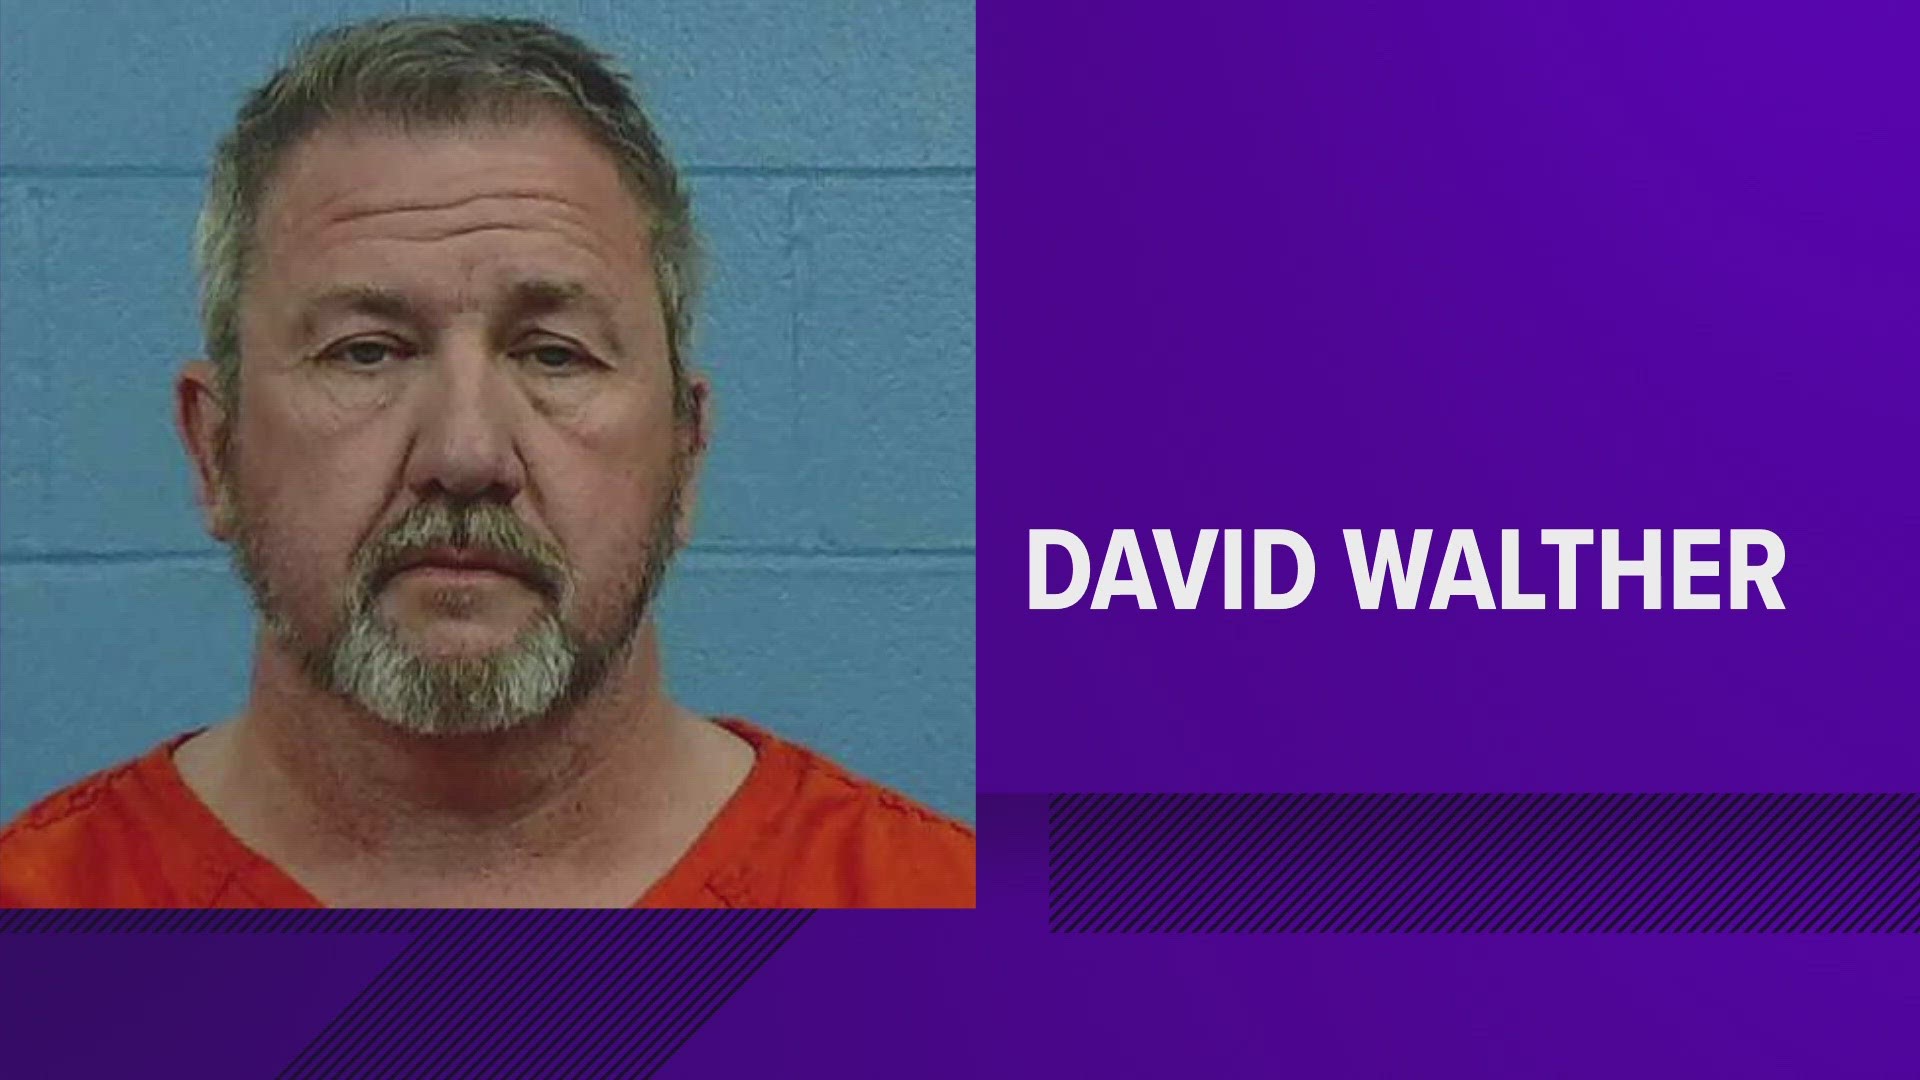 Round Rock, Texas, pastor pleads guilty to child porn charges kvue image pic